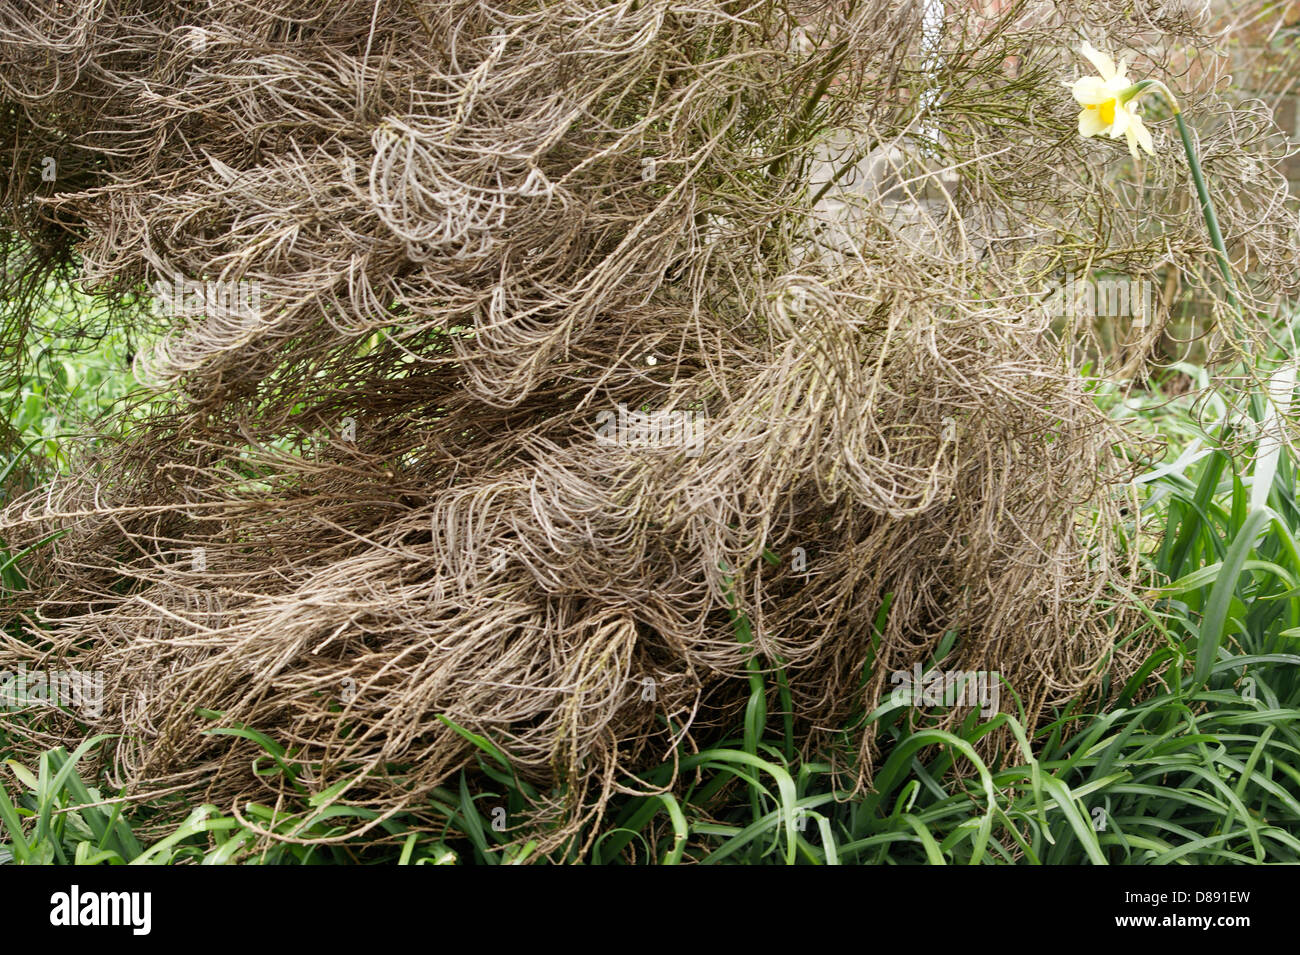 Spanish broom genista died due to climate change & severe weather conditions Stock Photo